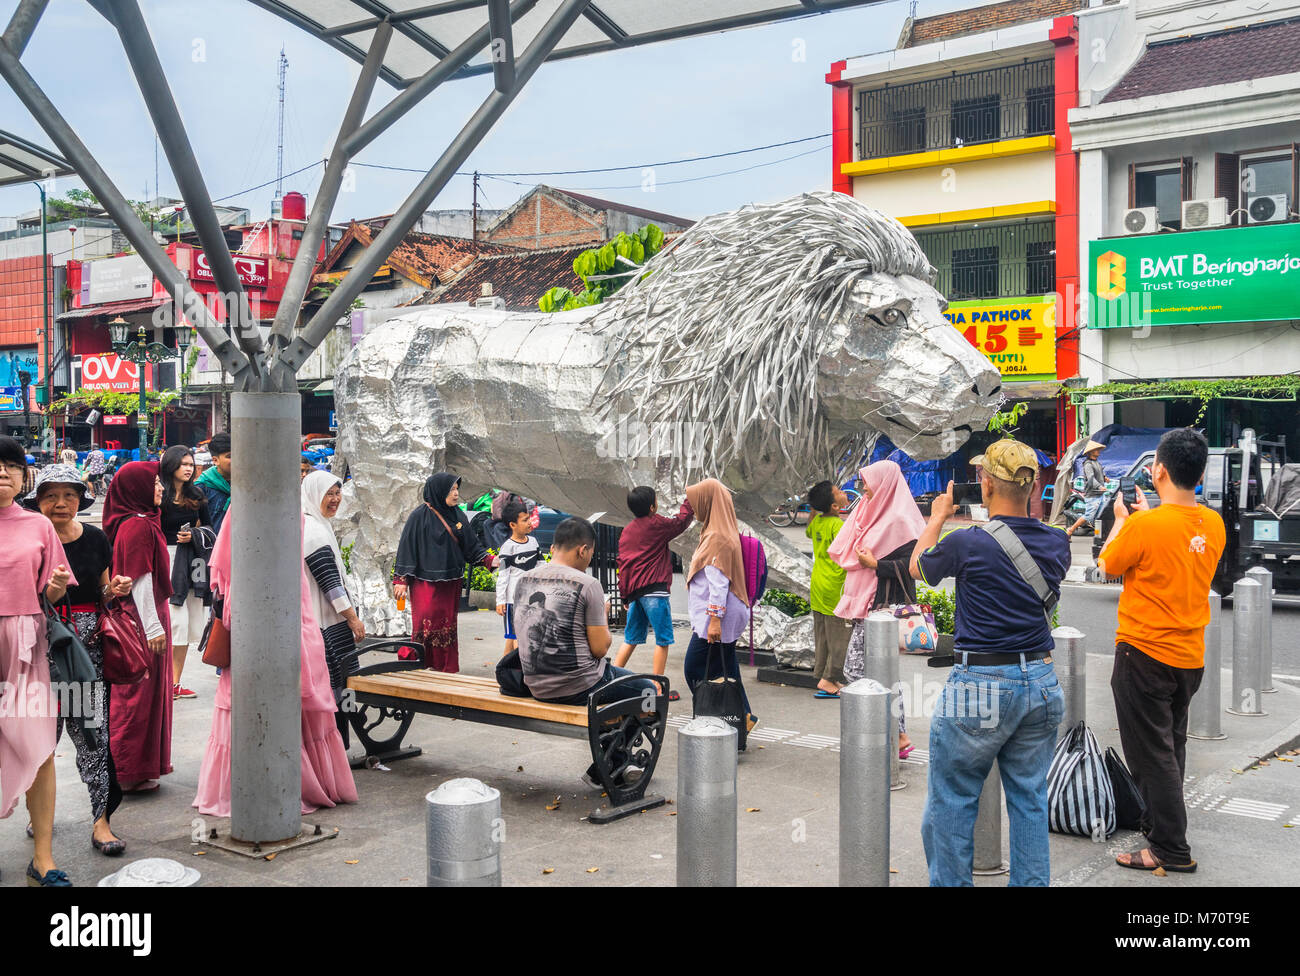 Indonesia, Central Java, Yogyakarta, Aluminium and Steel sculpture of a lion, titled 'Toughness' by local artist Timbul Raharjo at Jalan Malioboro Stock Photo